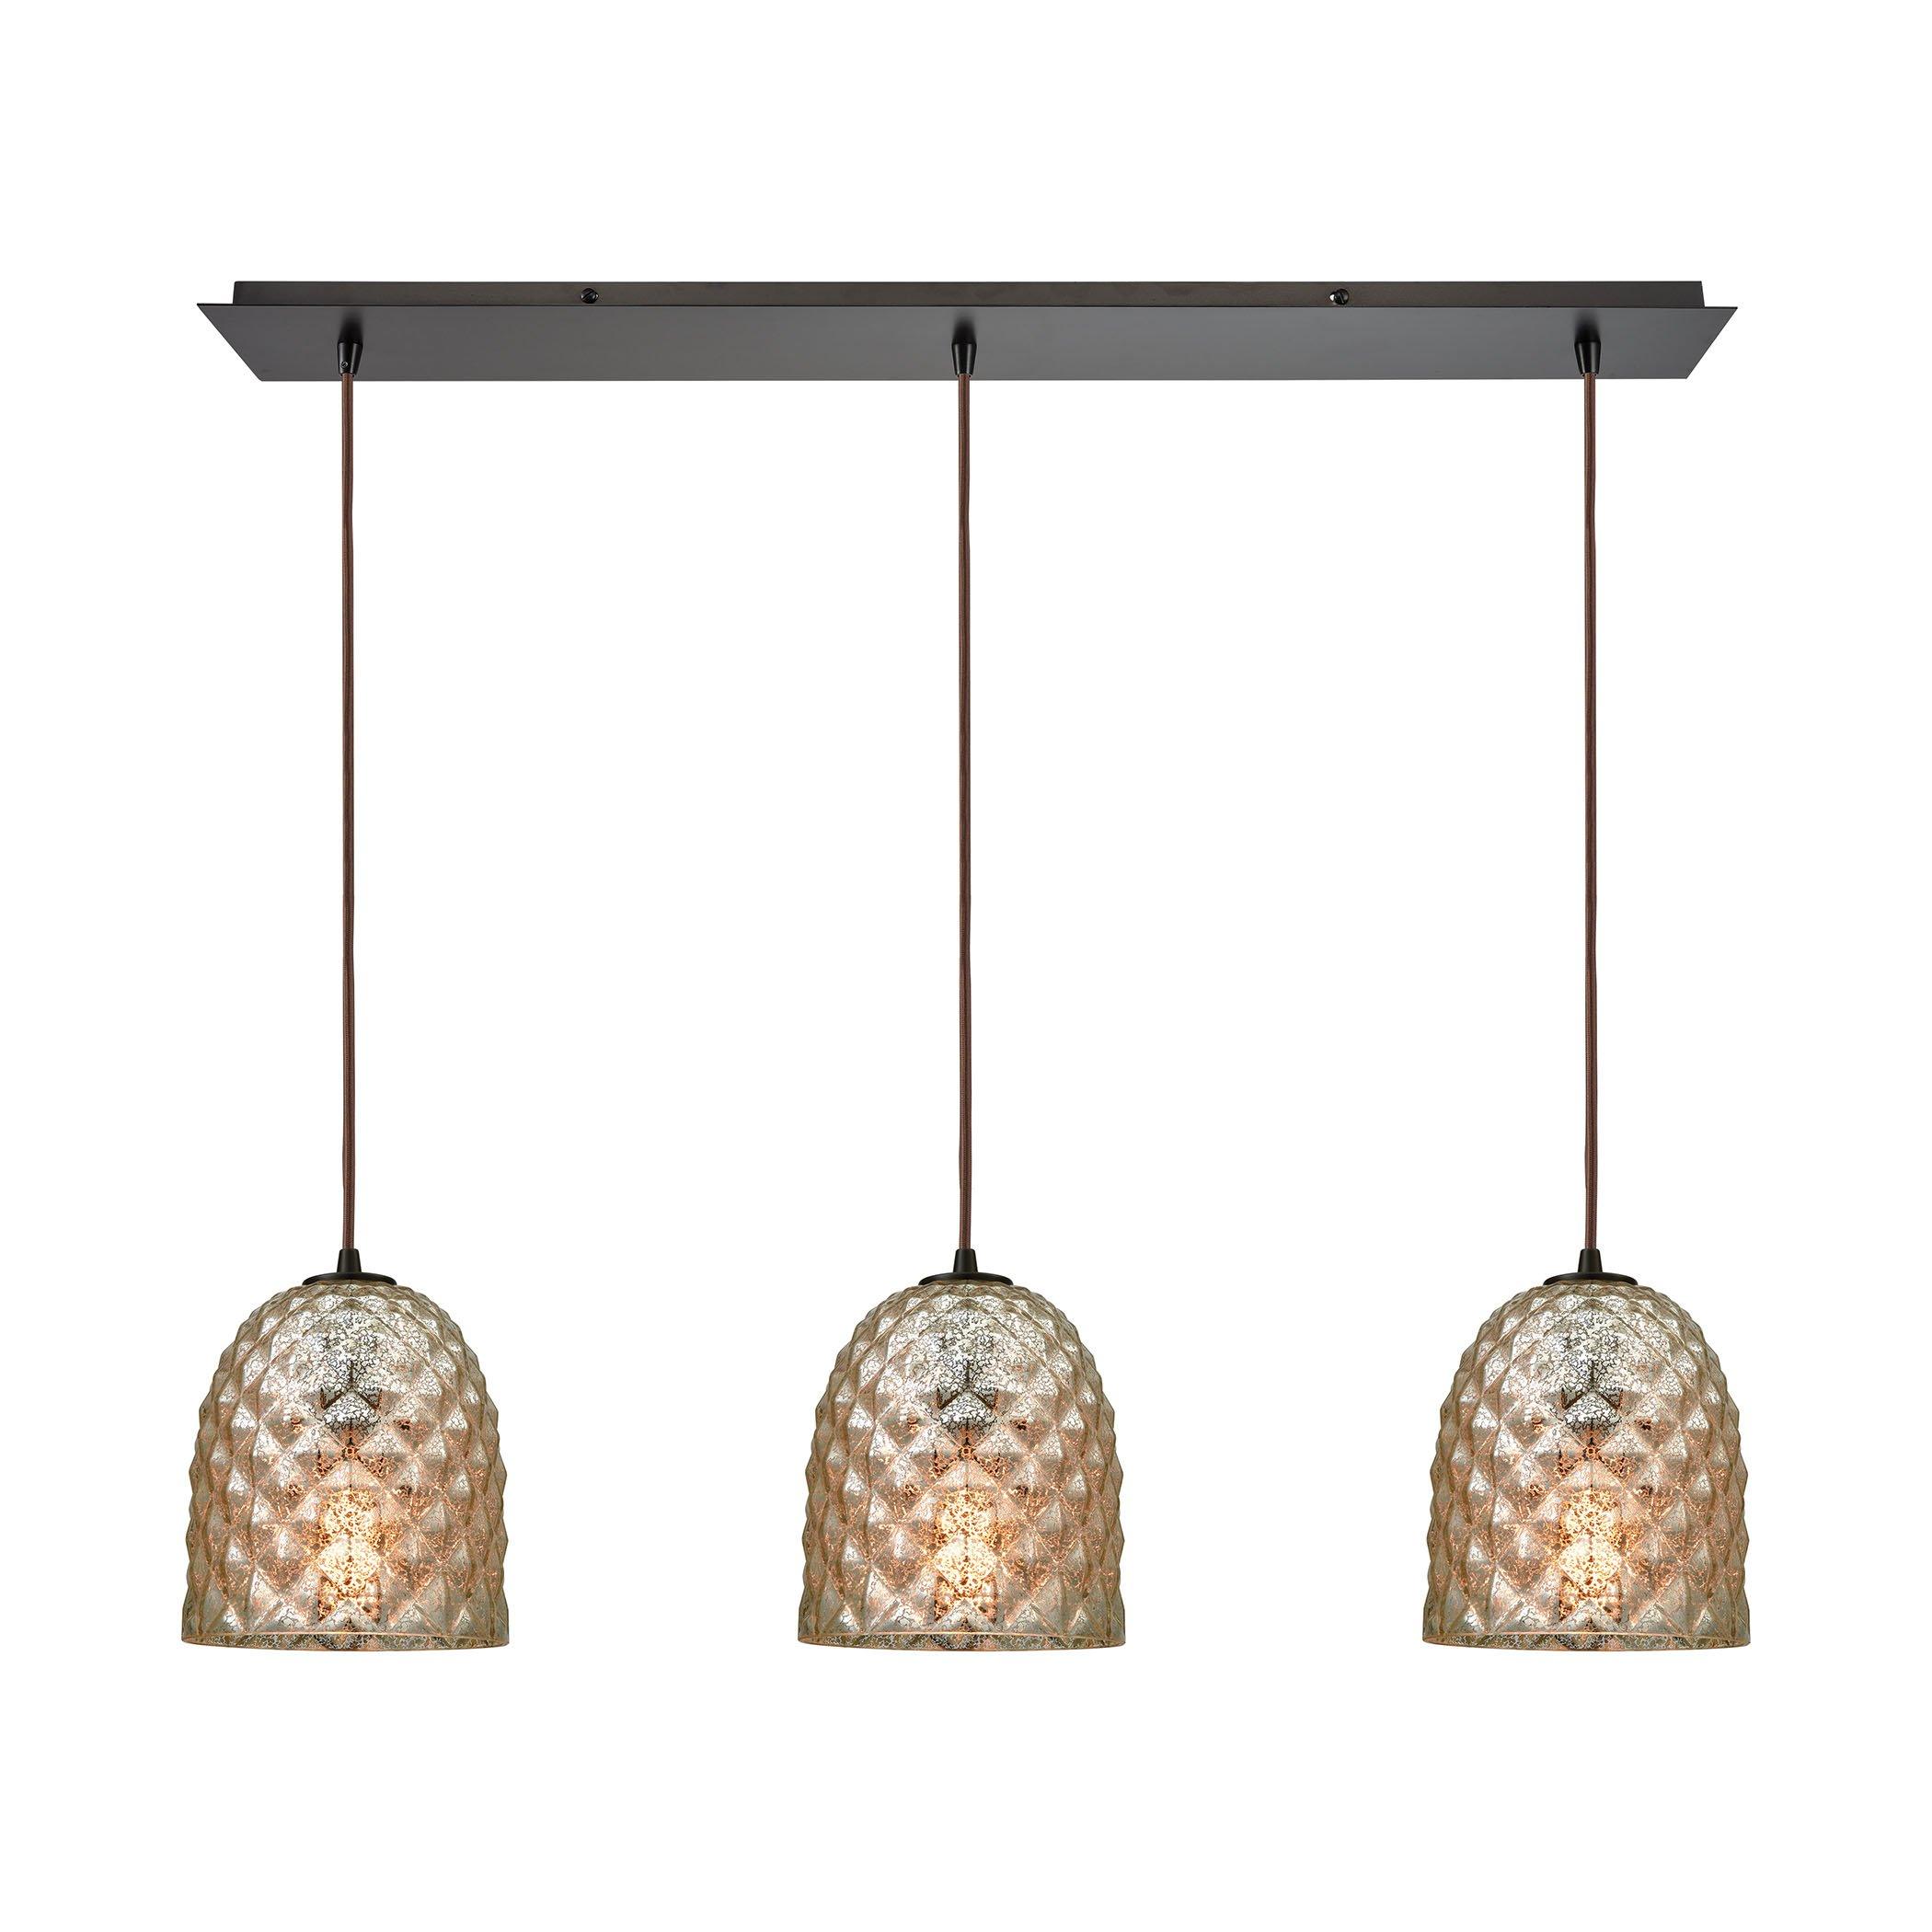 Brimley 3-Light Linear Pan In Oil Rubbed Bronze With Raised Diamond Texture Mercury Glass Pendant Ceiling Elk Lighting 